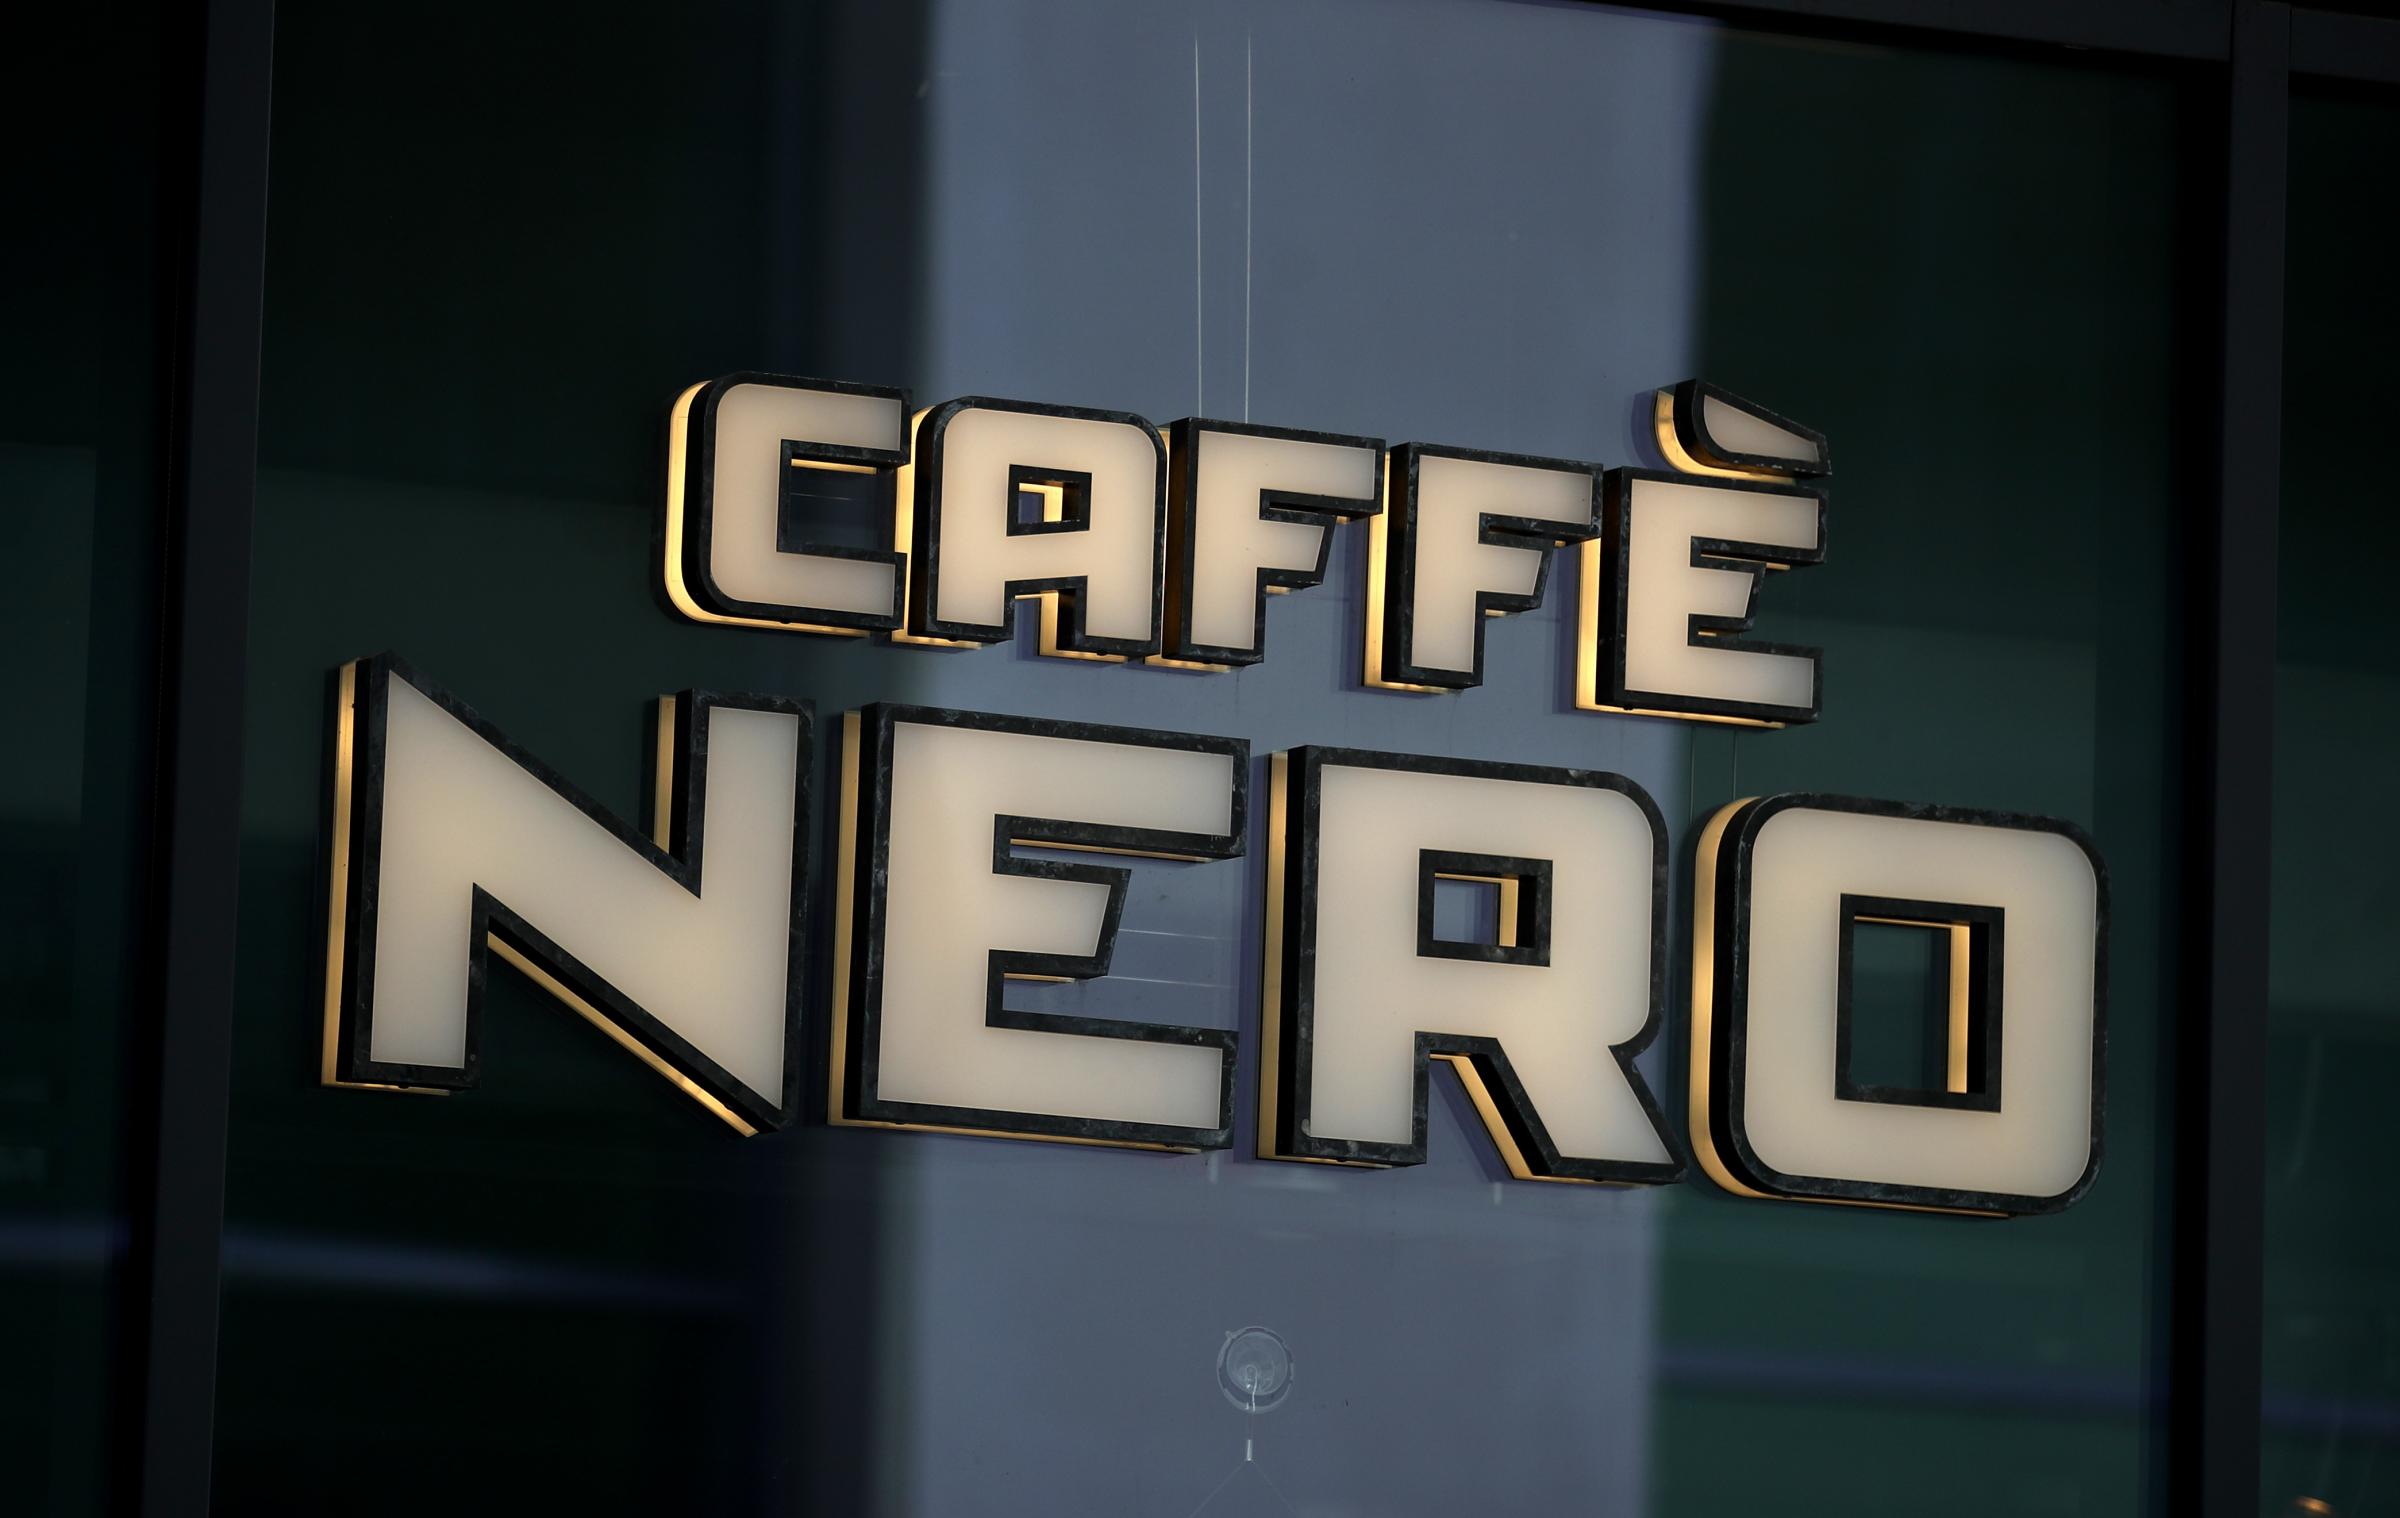 Deal gives NHS workers free Caffè Nero coffee